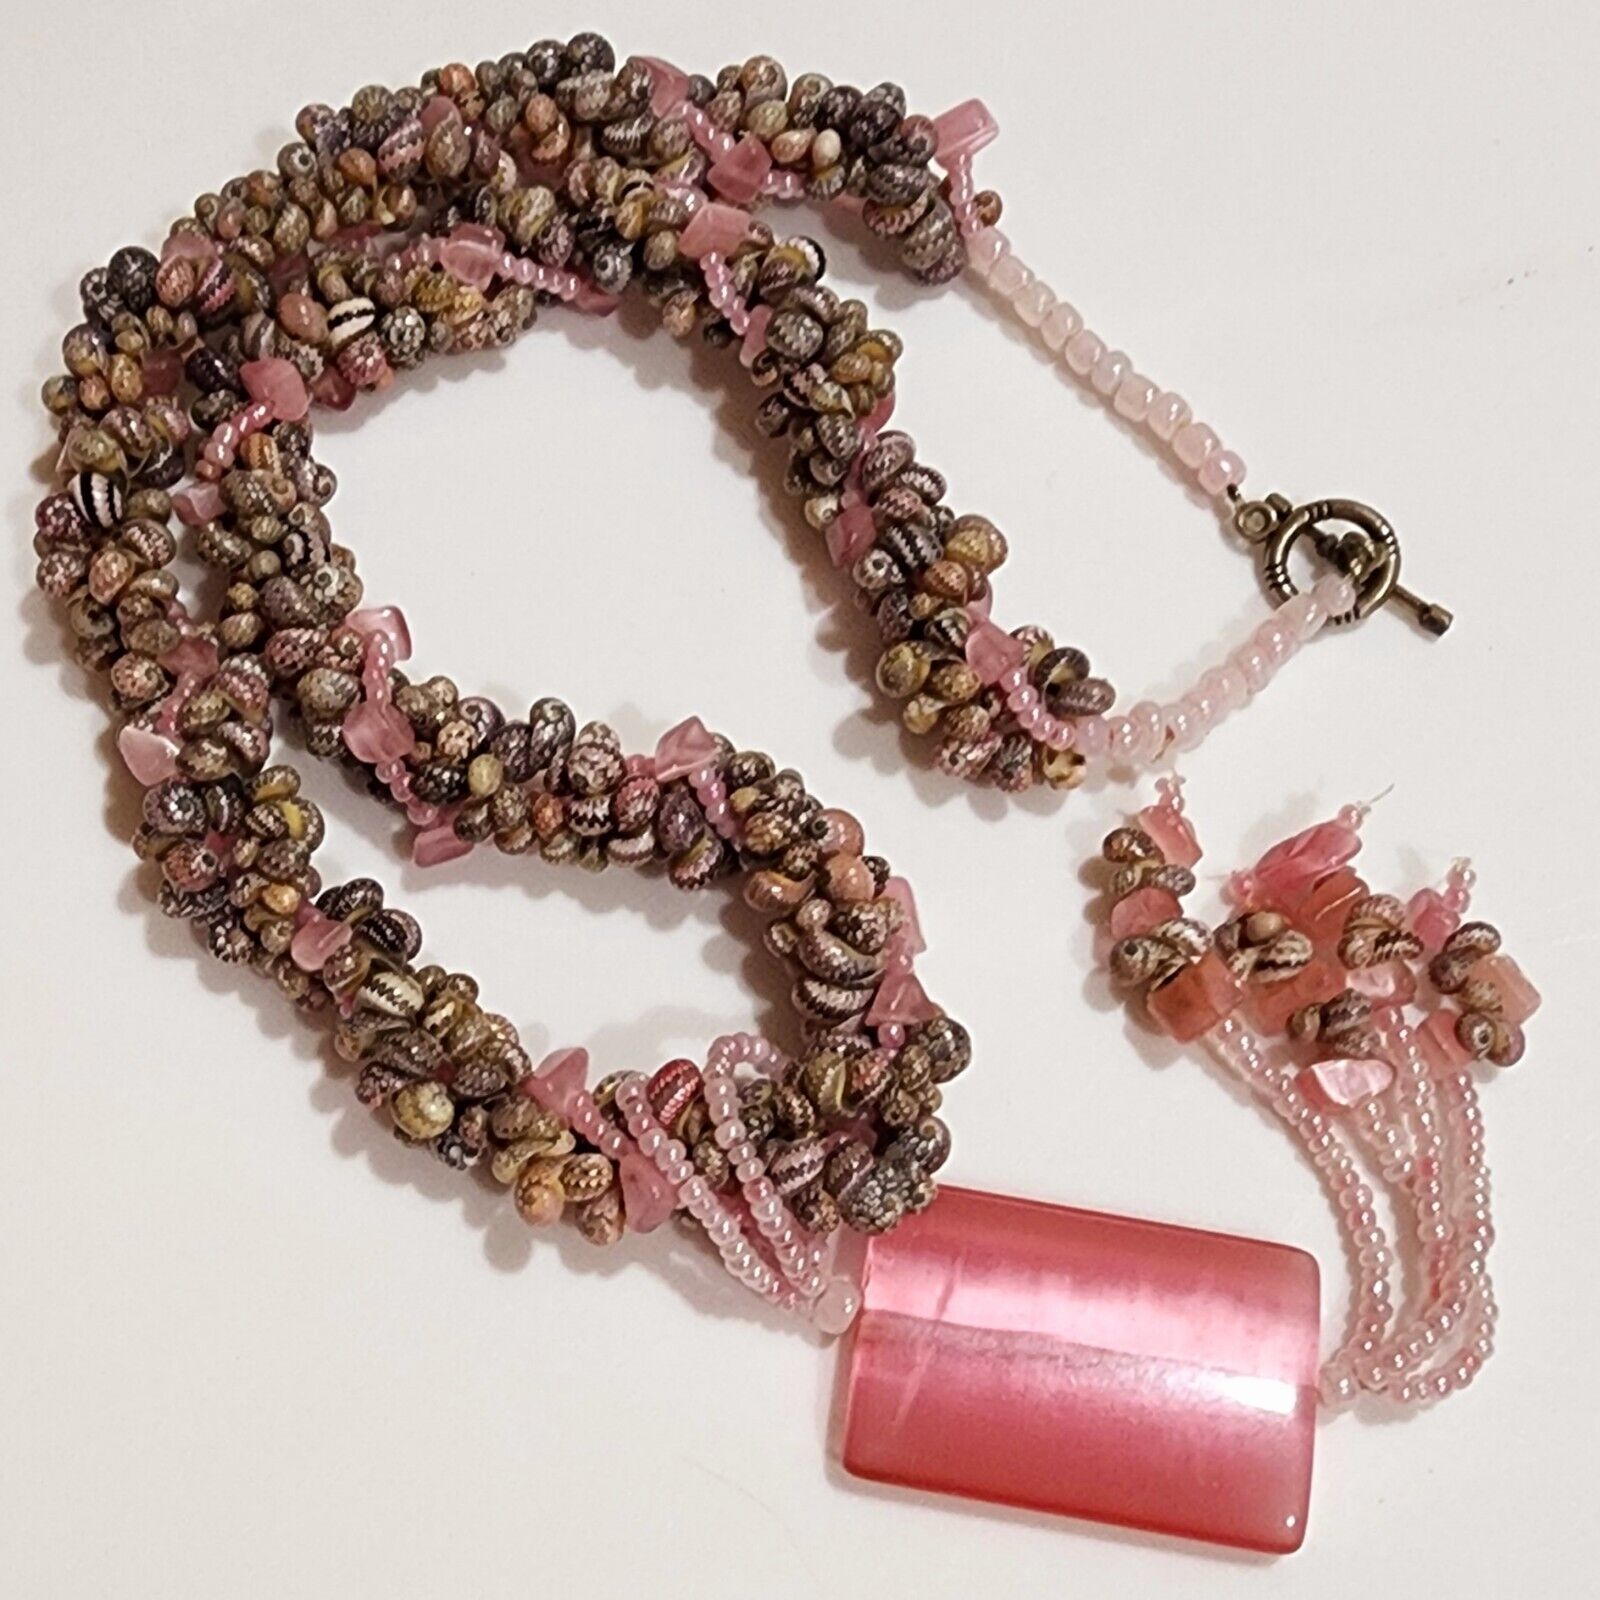 Hawaiian Style Sacred Shell Inspired Necklace Pink Gemstone Glass Beads...